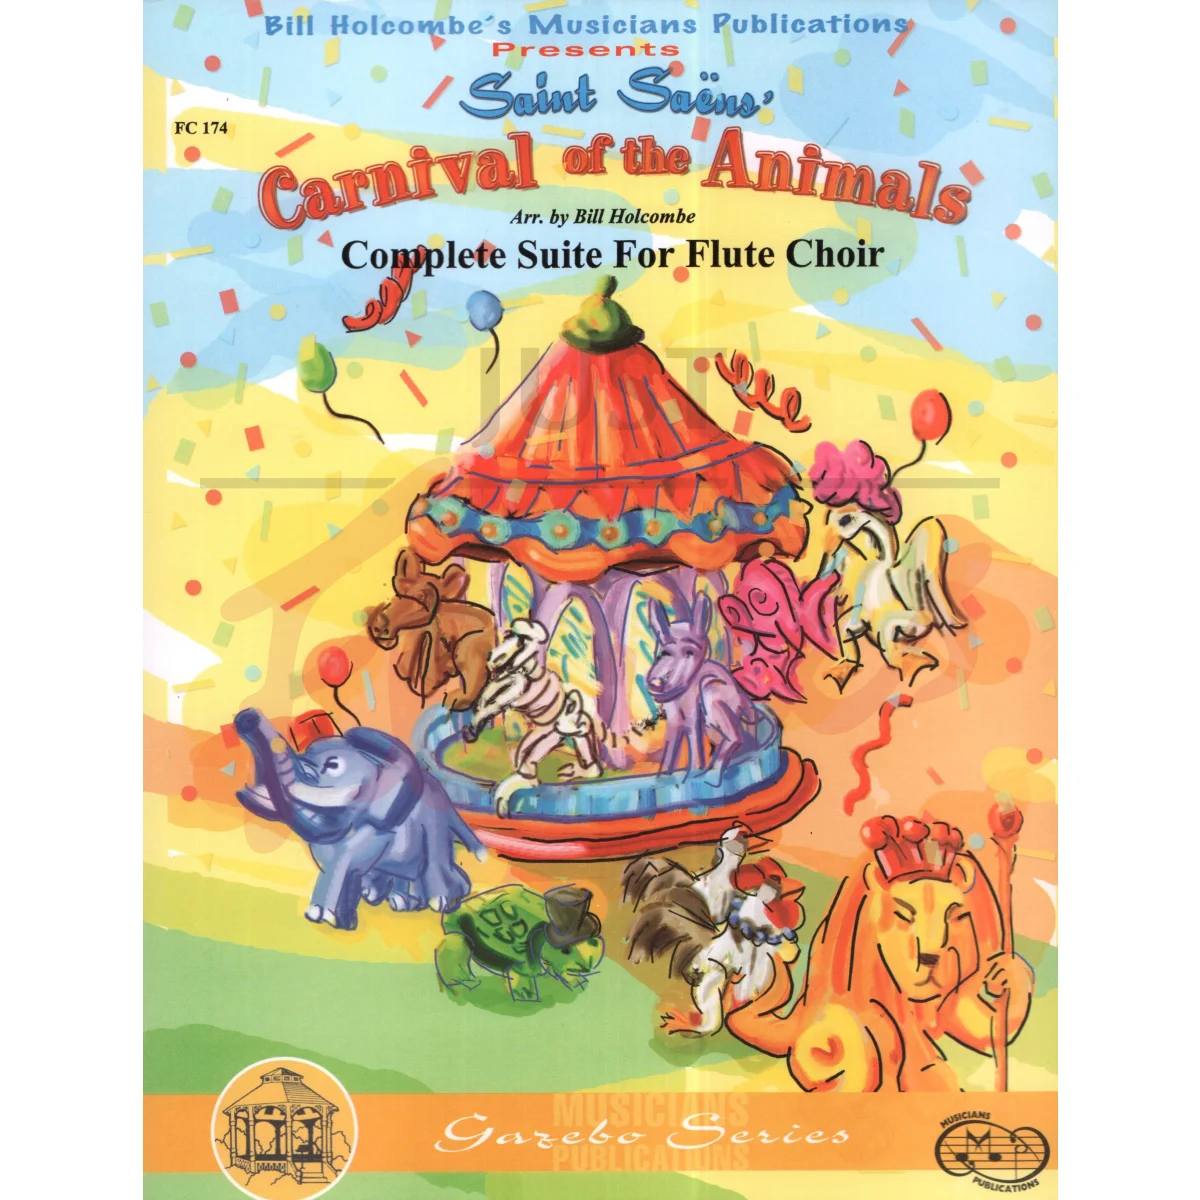 The Carnival of the Animals: Complete Suite for Flute Choir